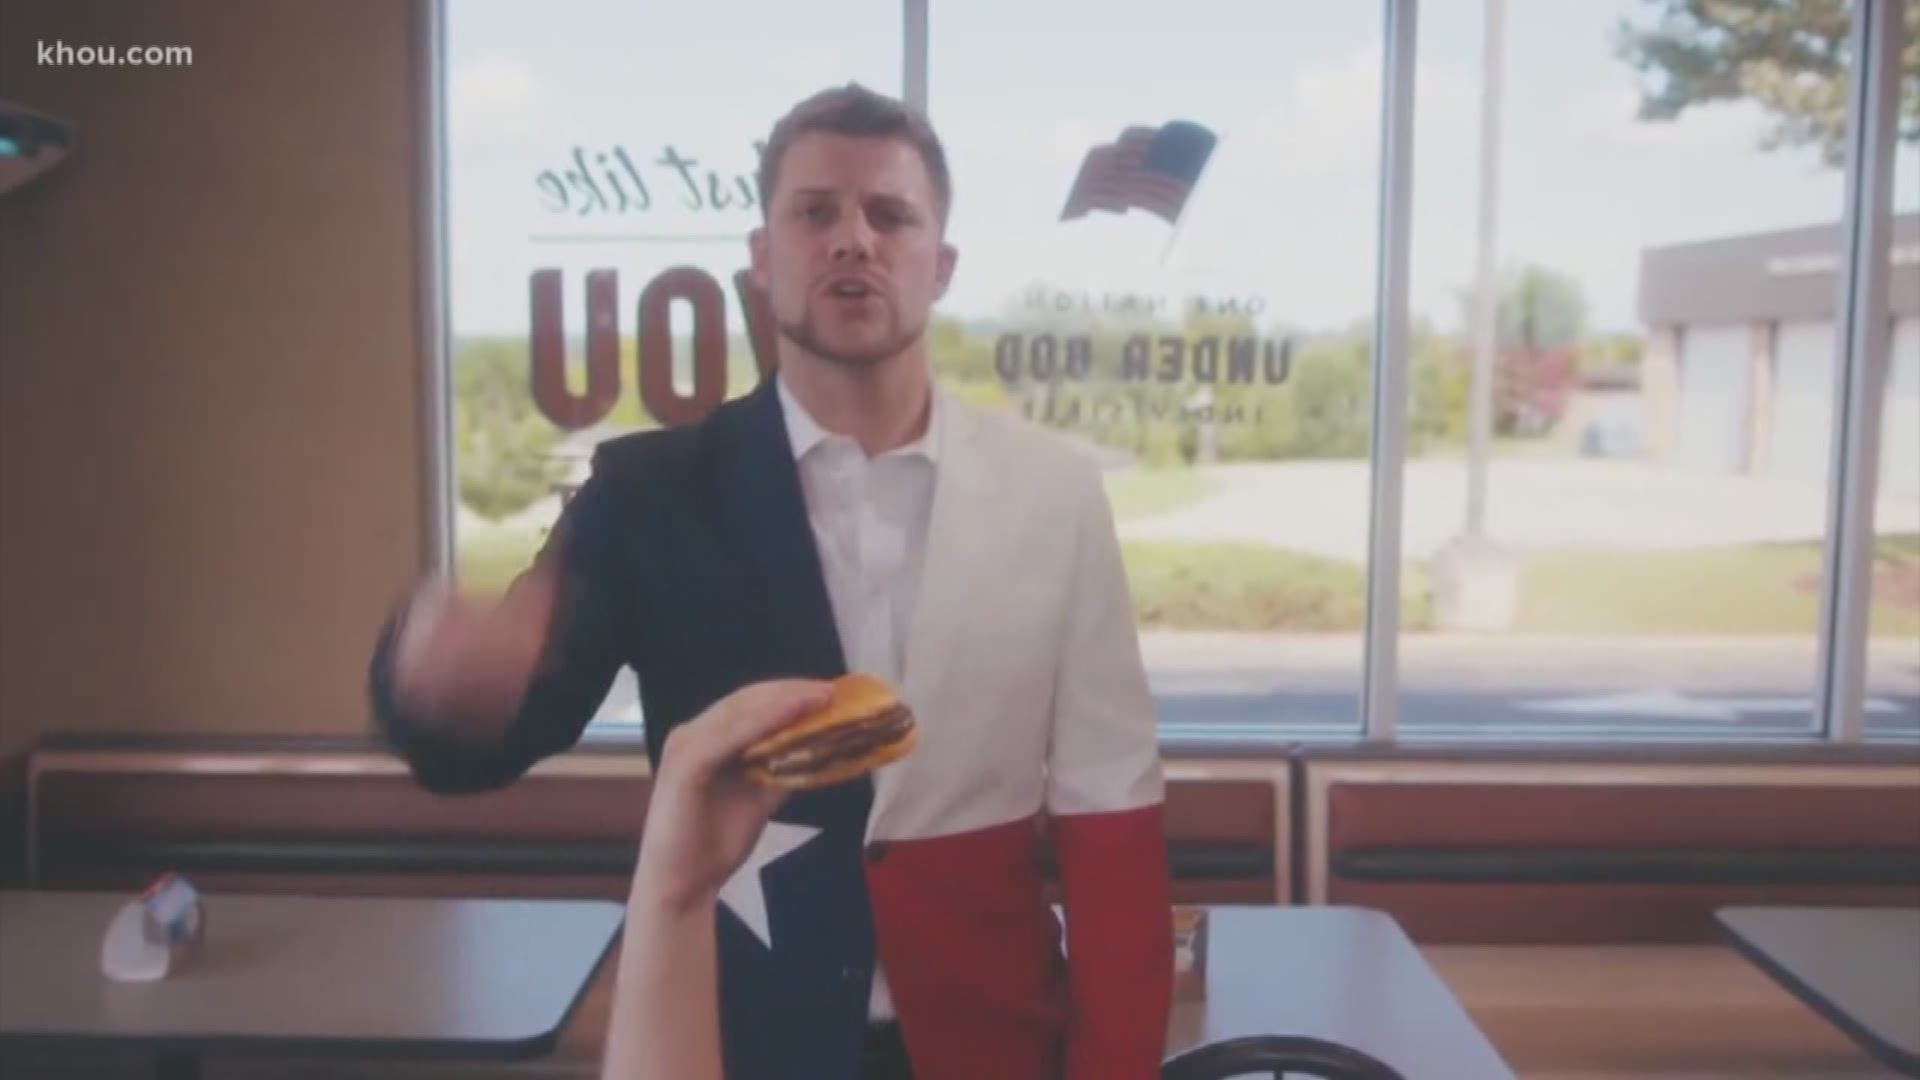 A Waco man and his friends have gone viral after rapping a catchy song about Whataburger.